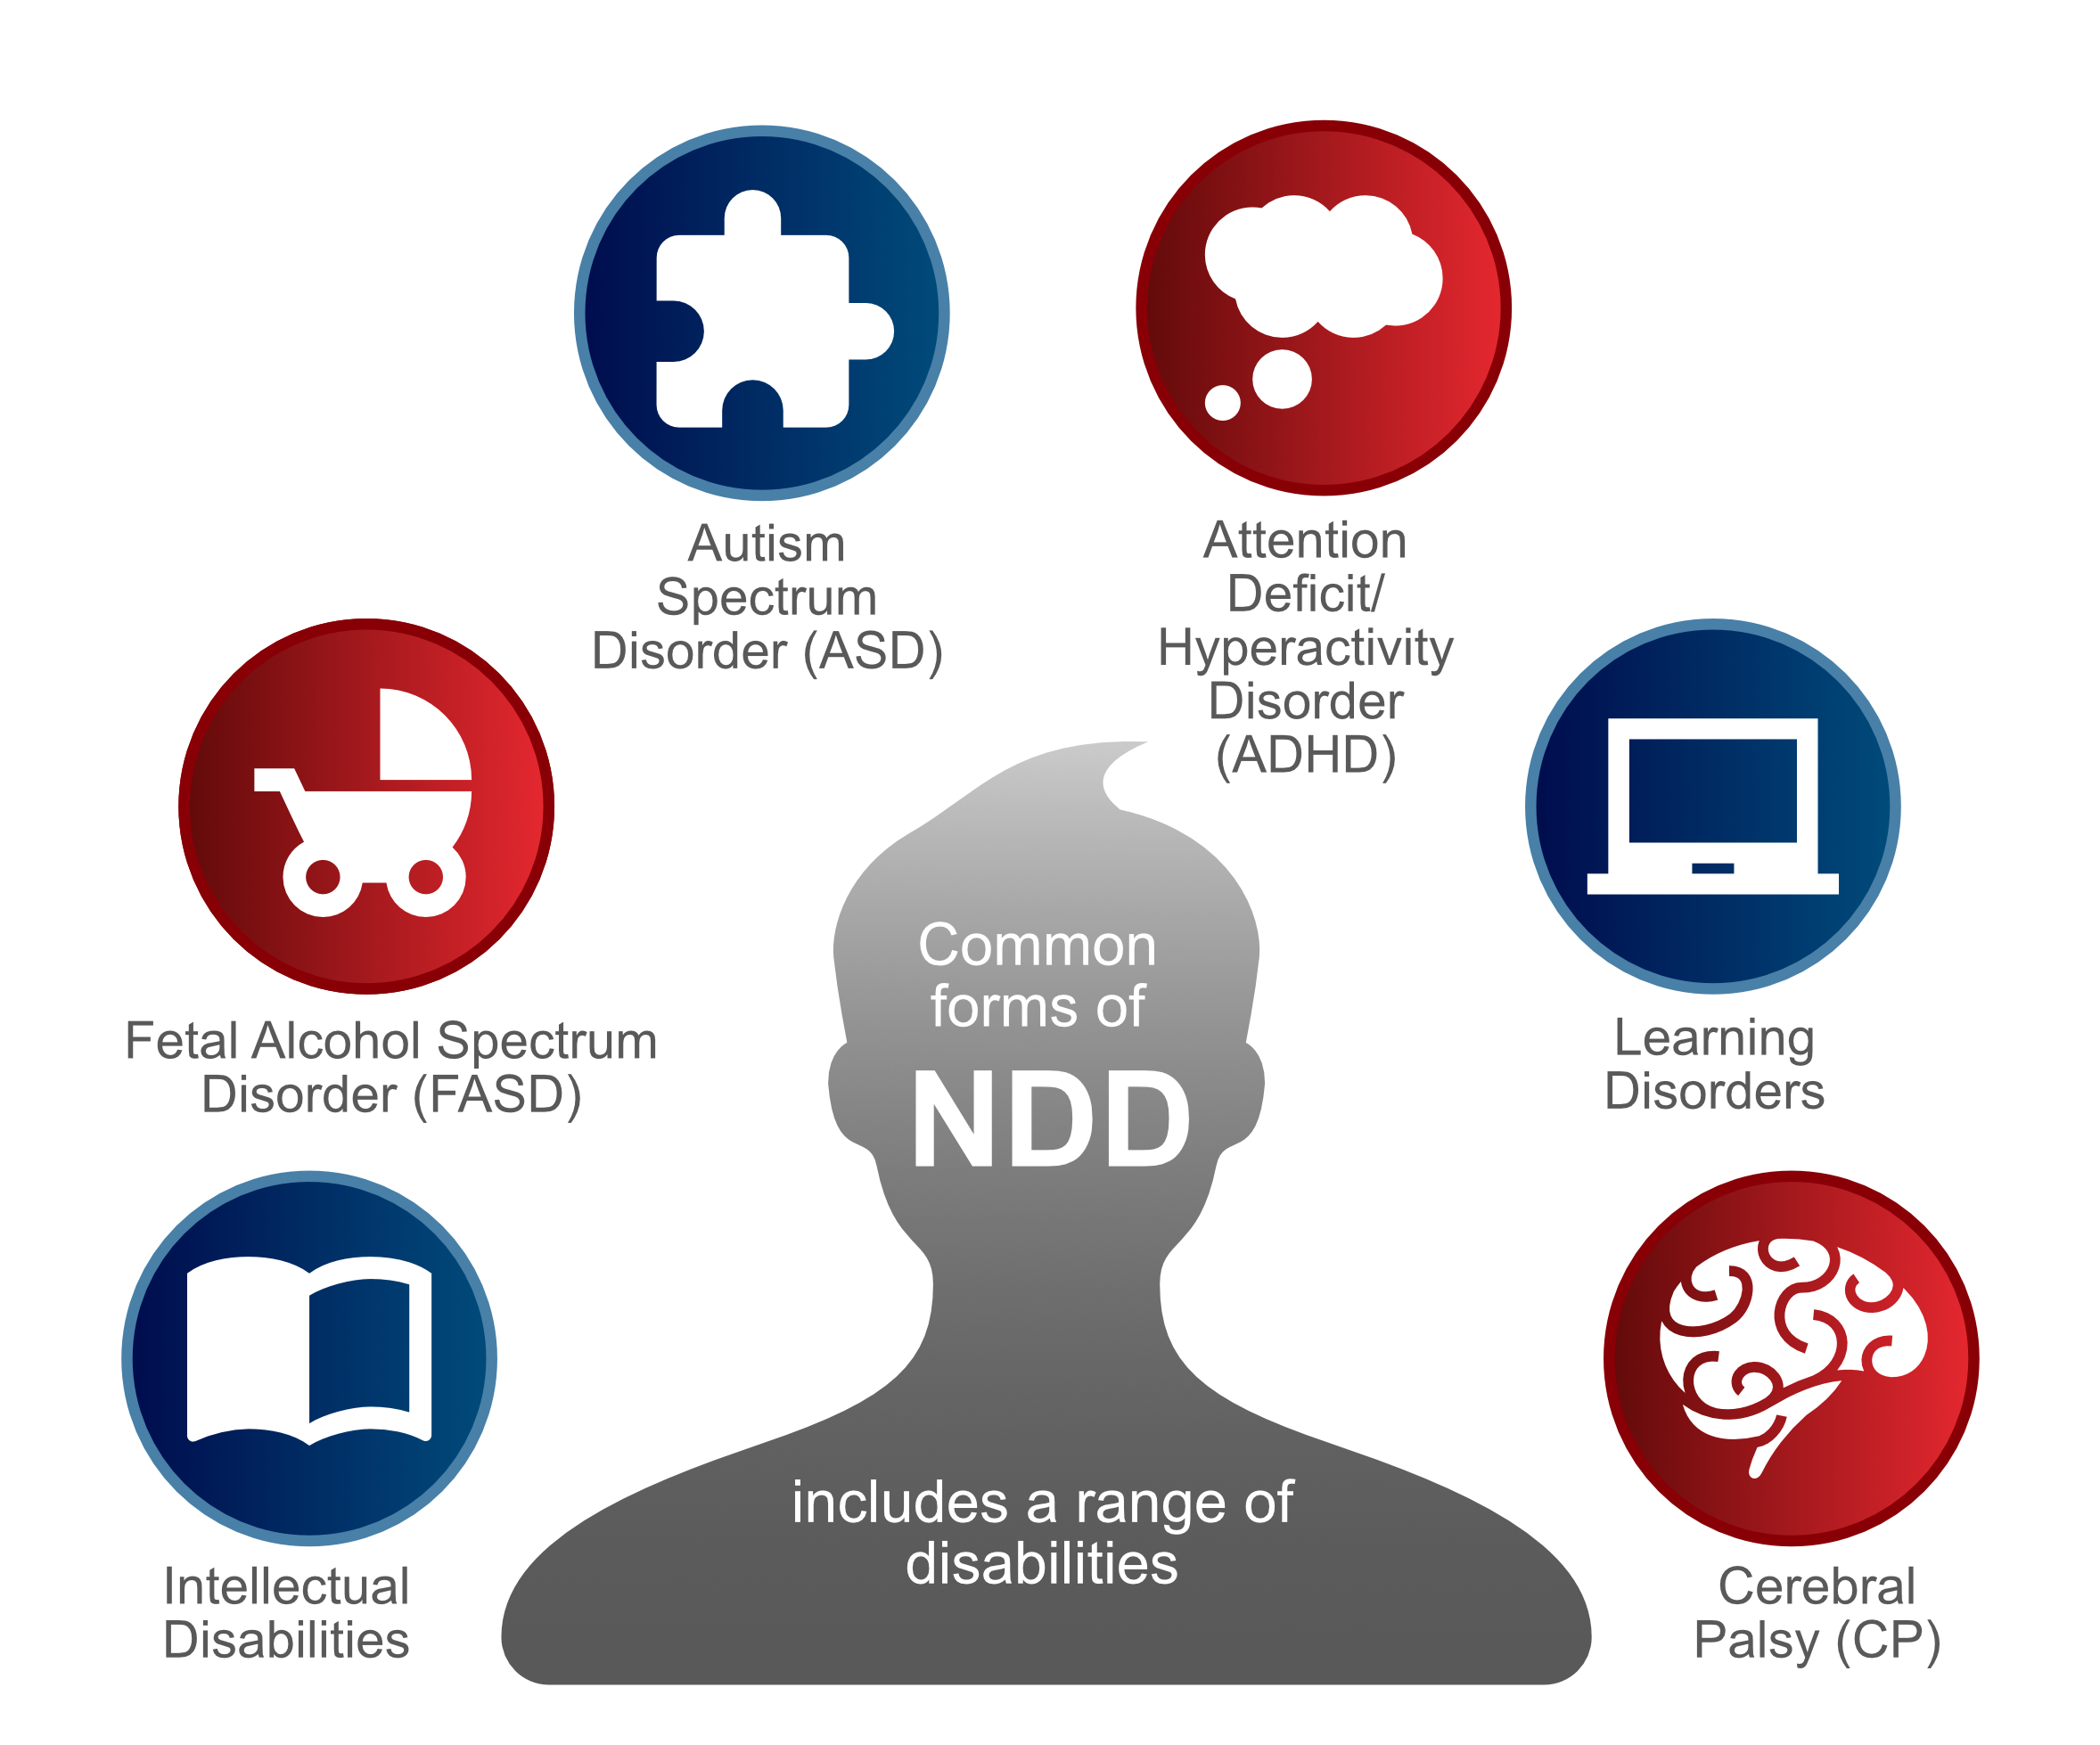 Common NDD disabilities